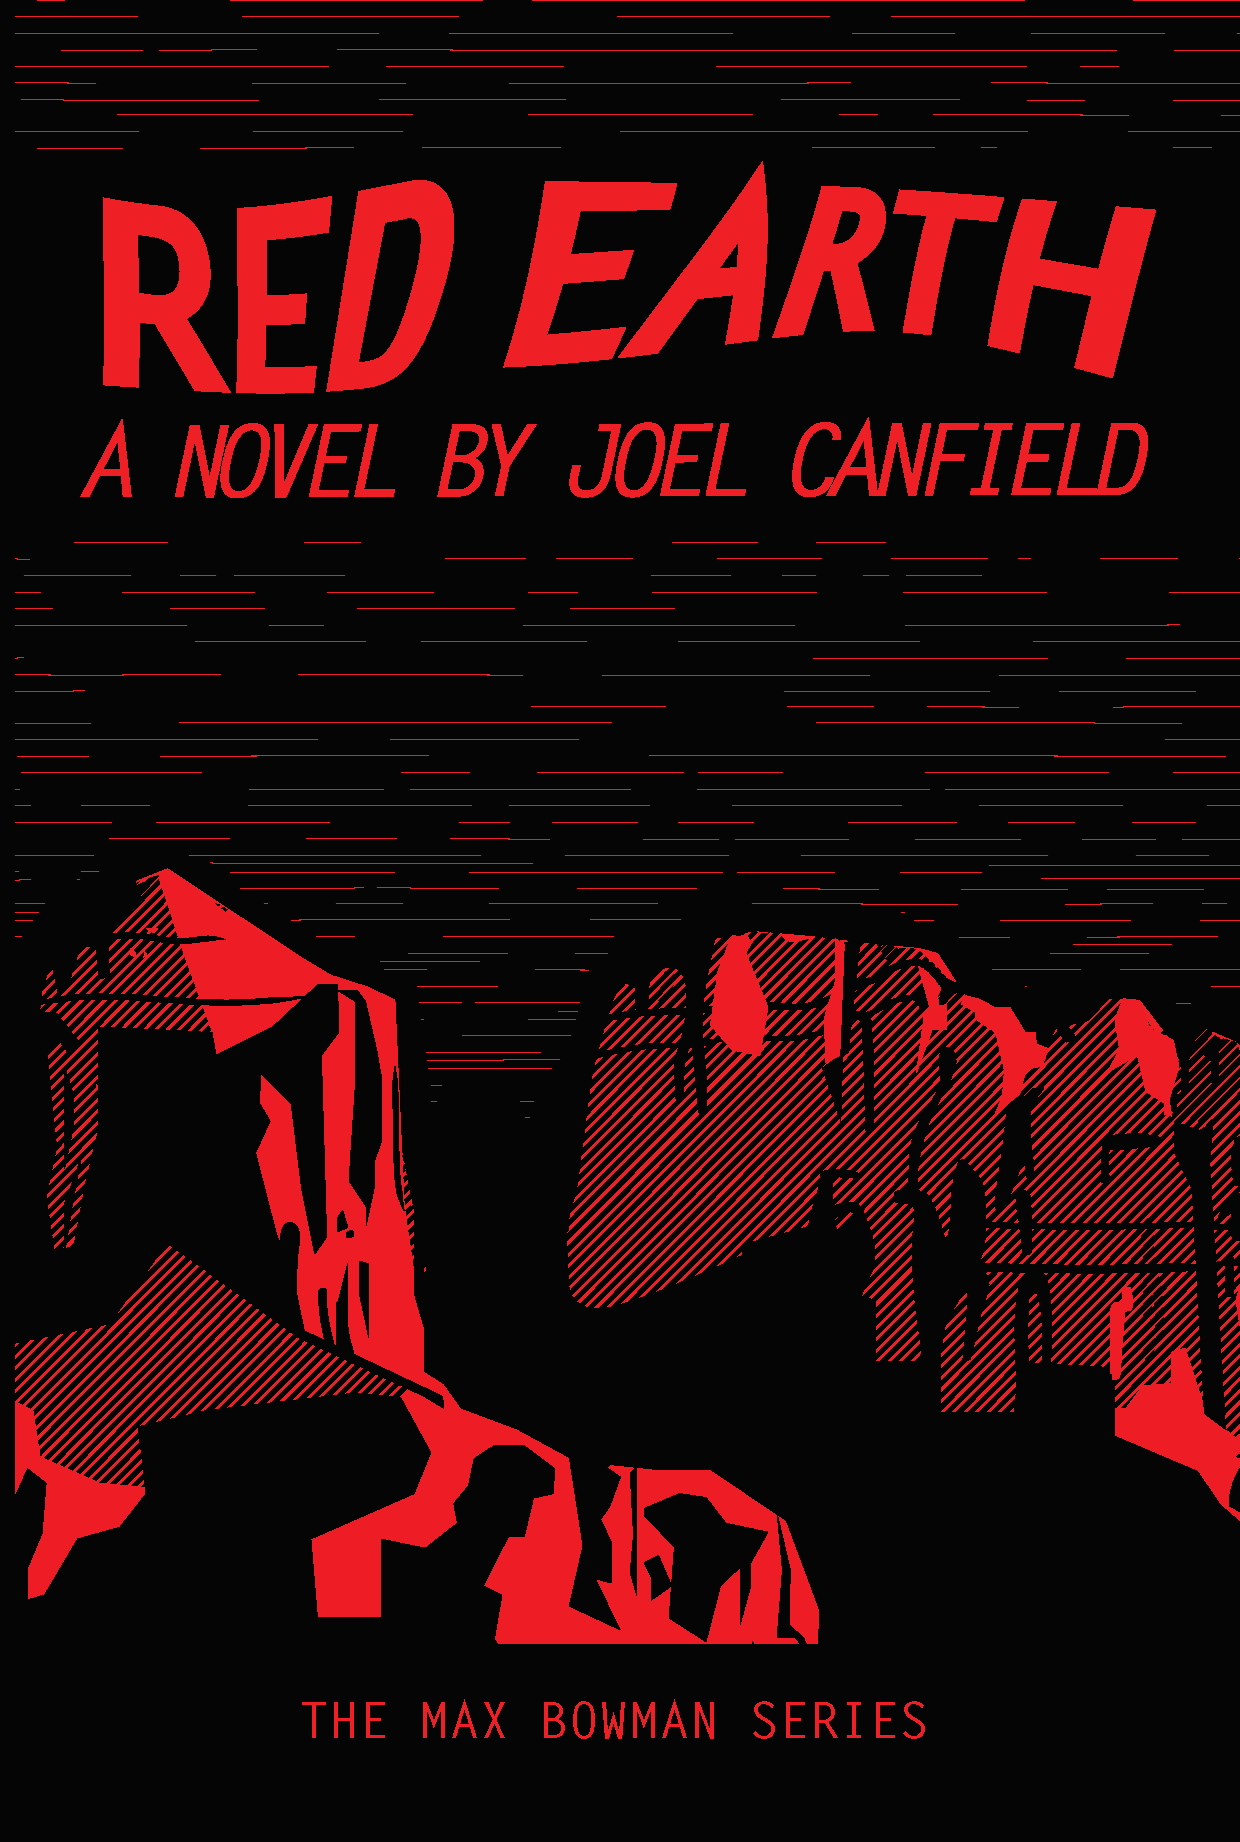 Red Earth (The Misadventures of Max Bowman Book 3) by Joel Canfield